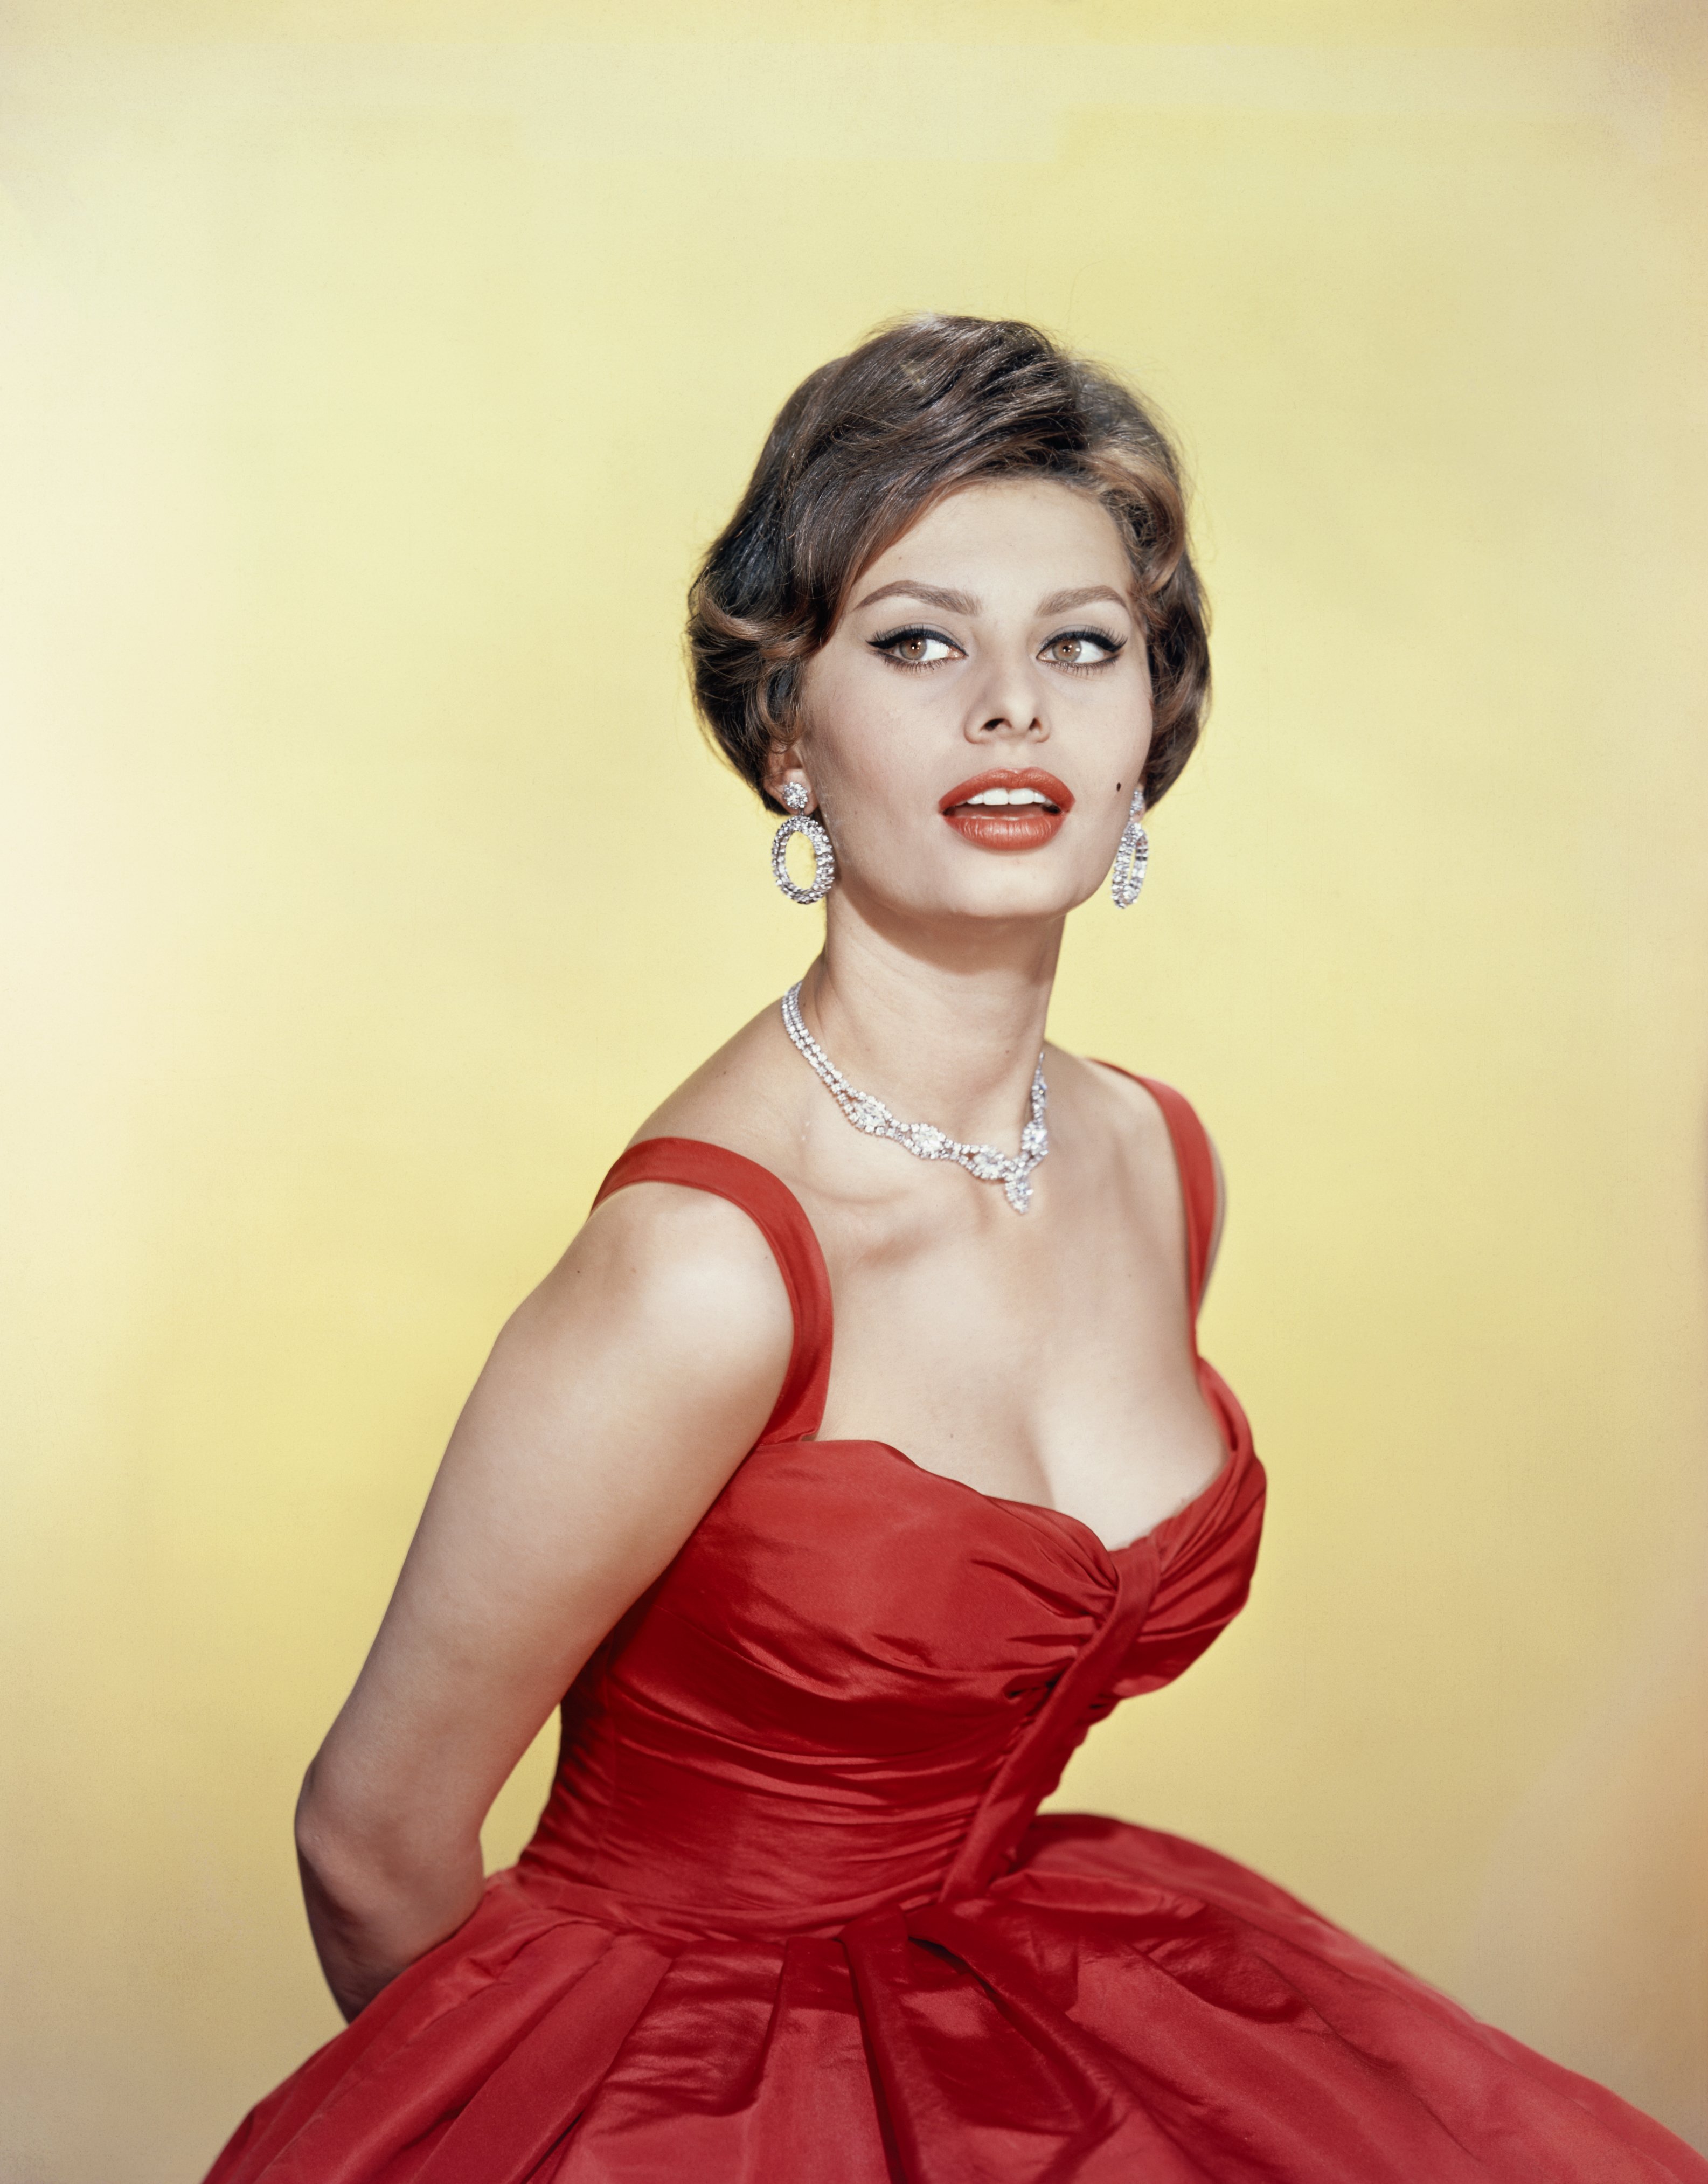 Actress Sophia Loren wearing a red dress in 1934. | Source: Getty Images